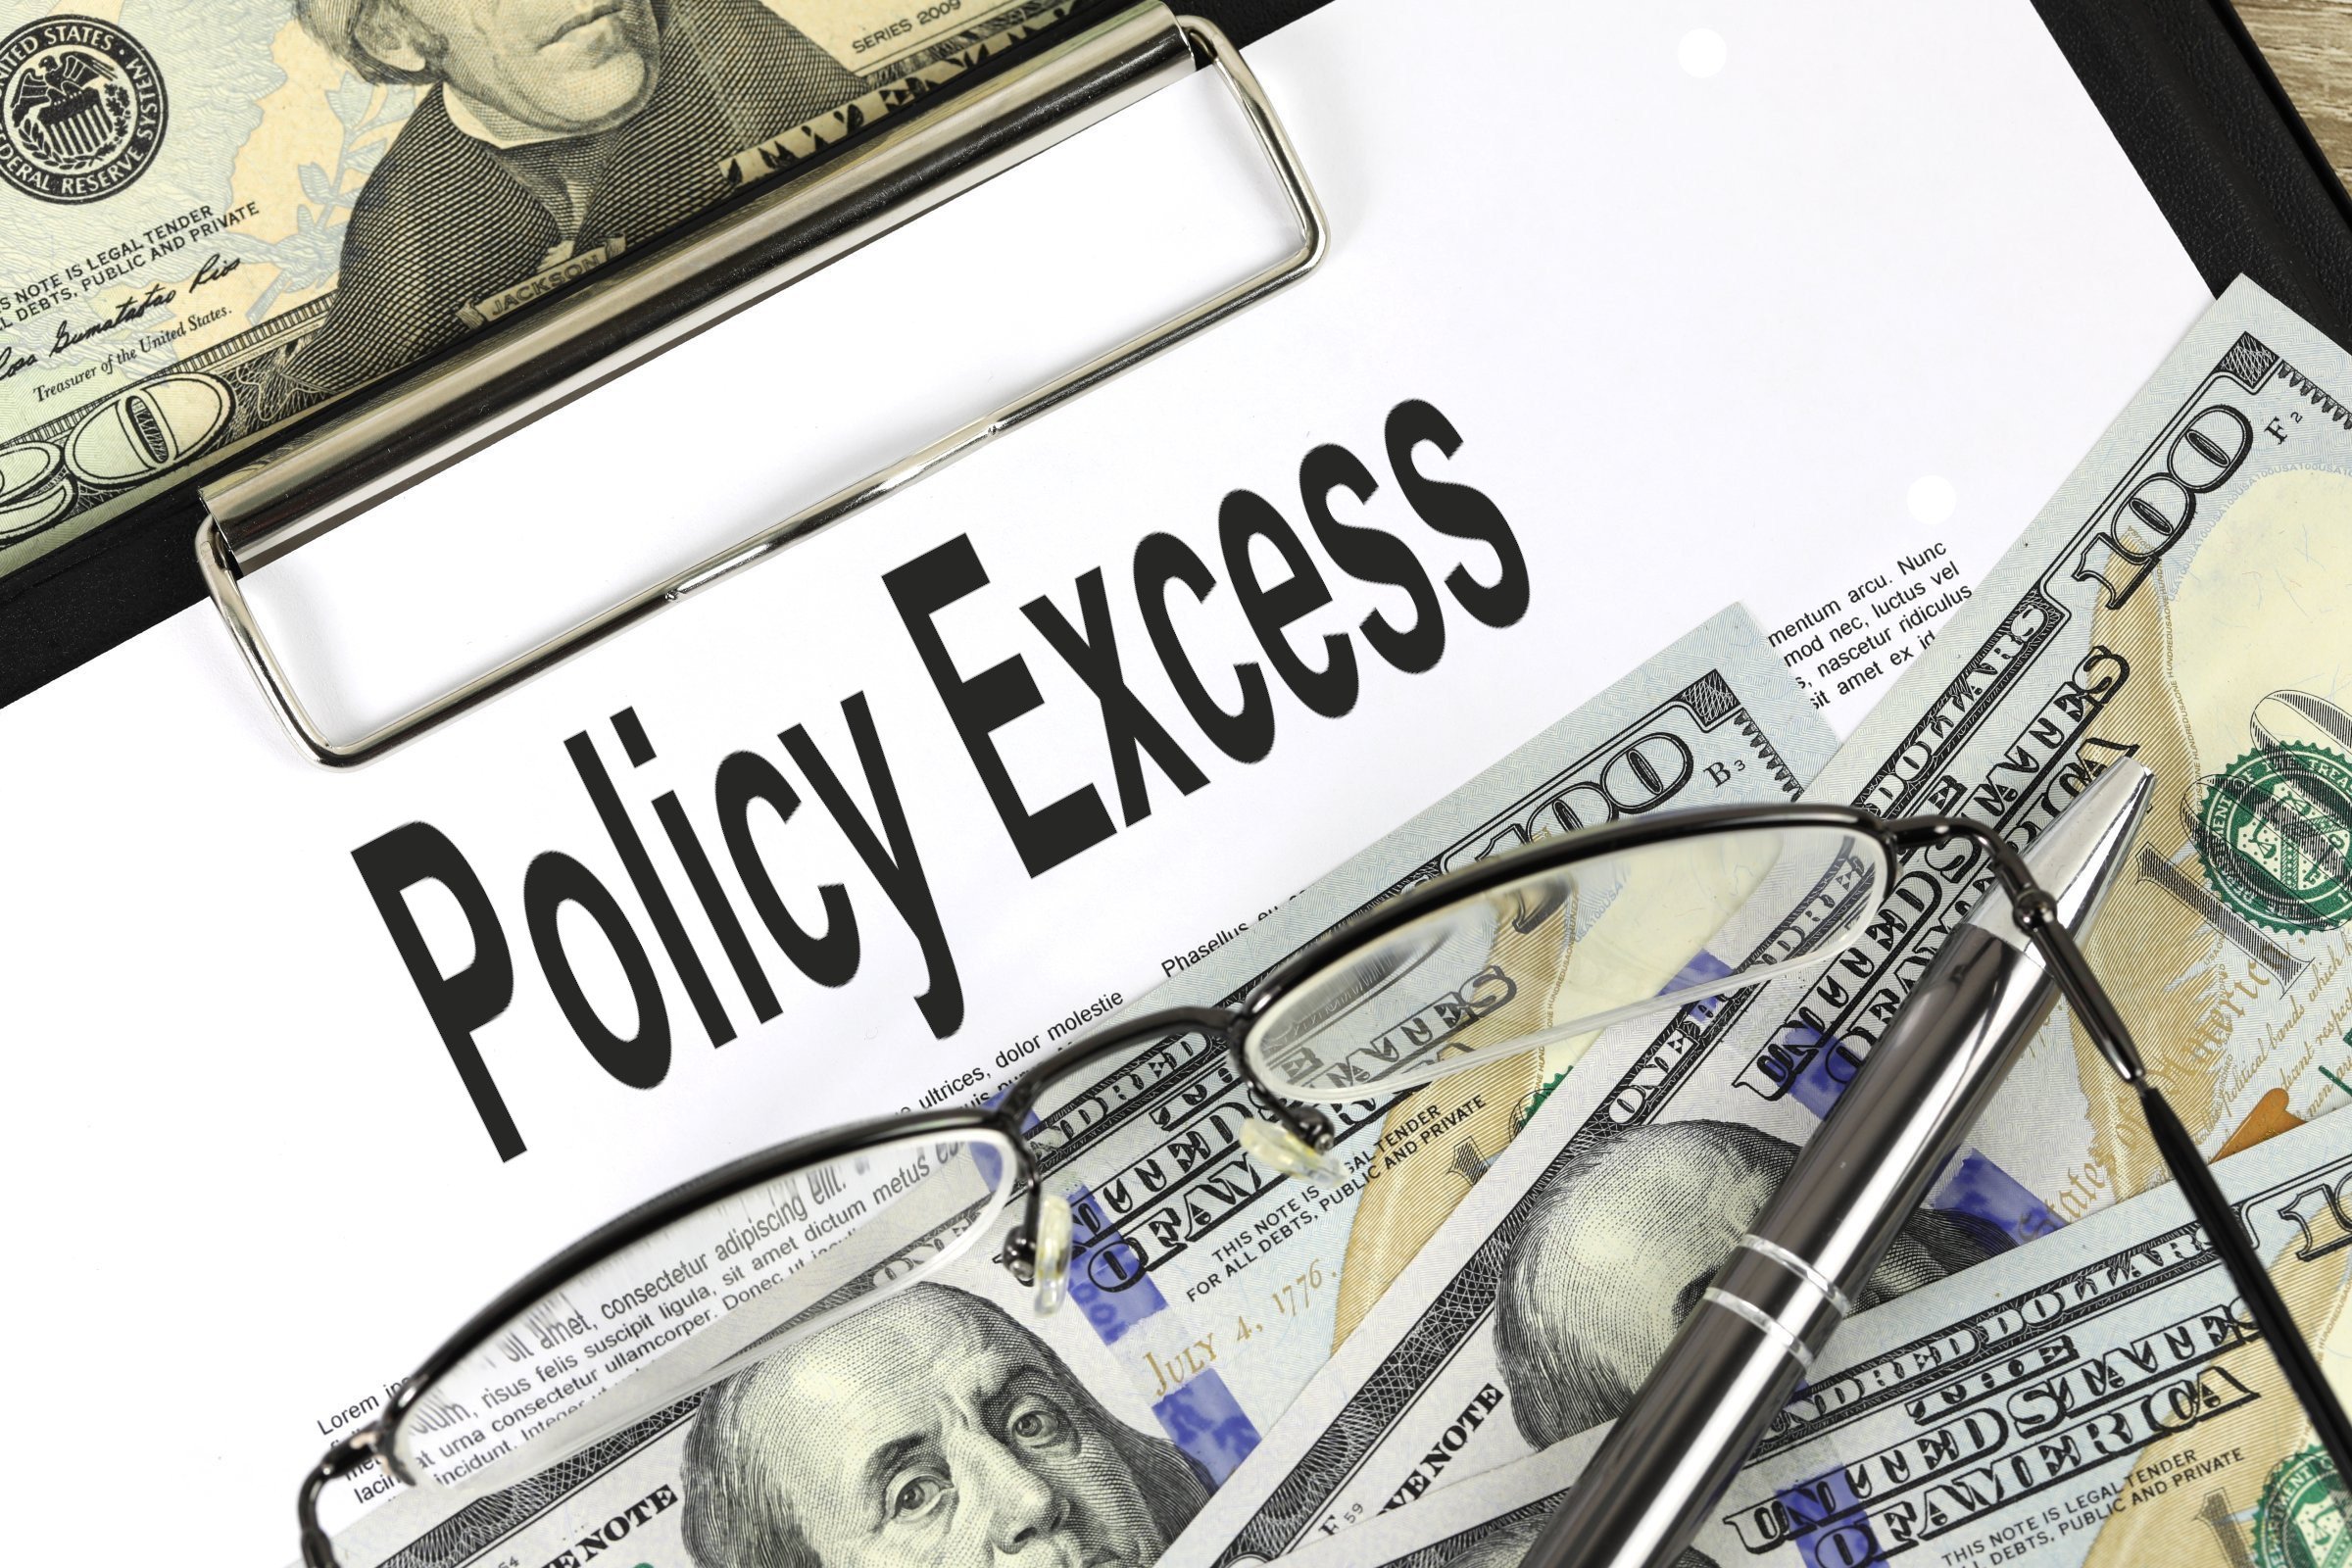 Policy Excess Free Of Charge Creative Commons Financial 3 Image